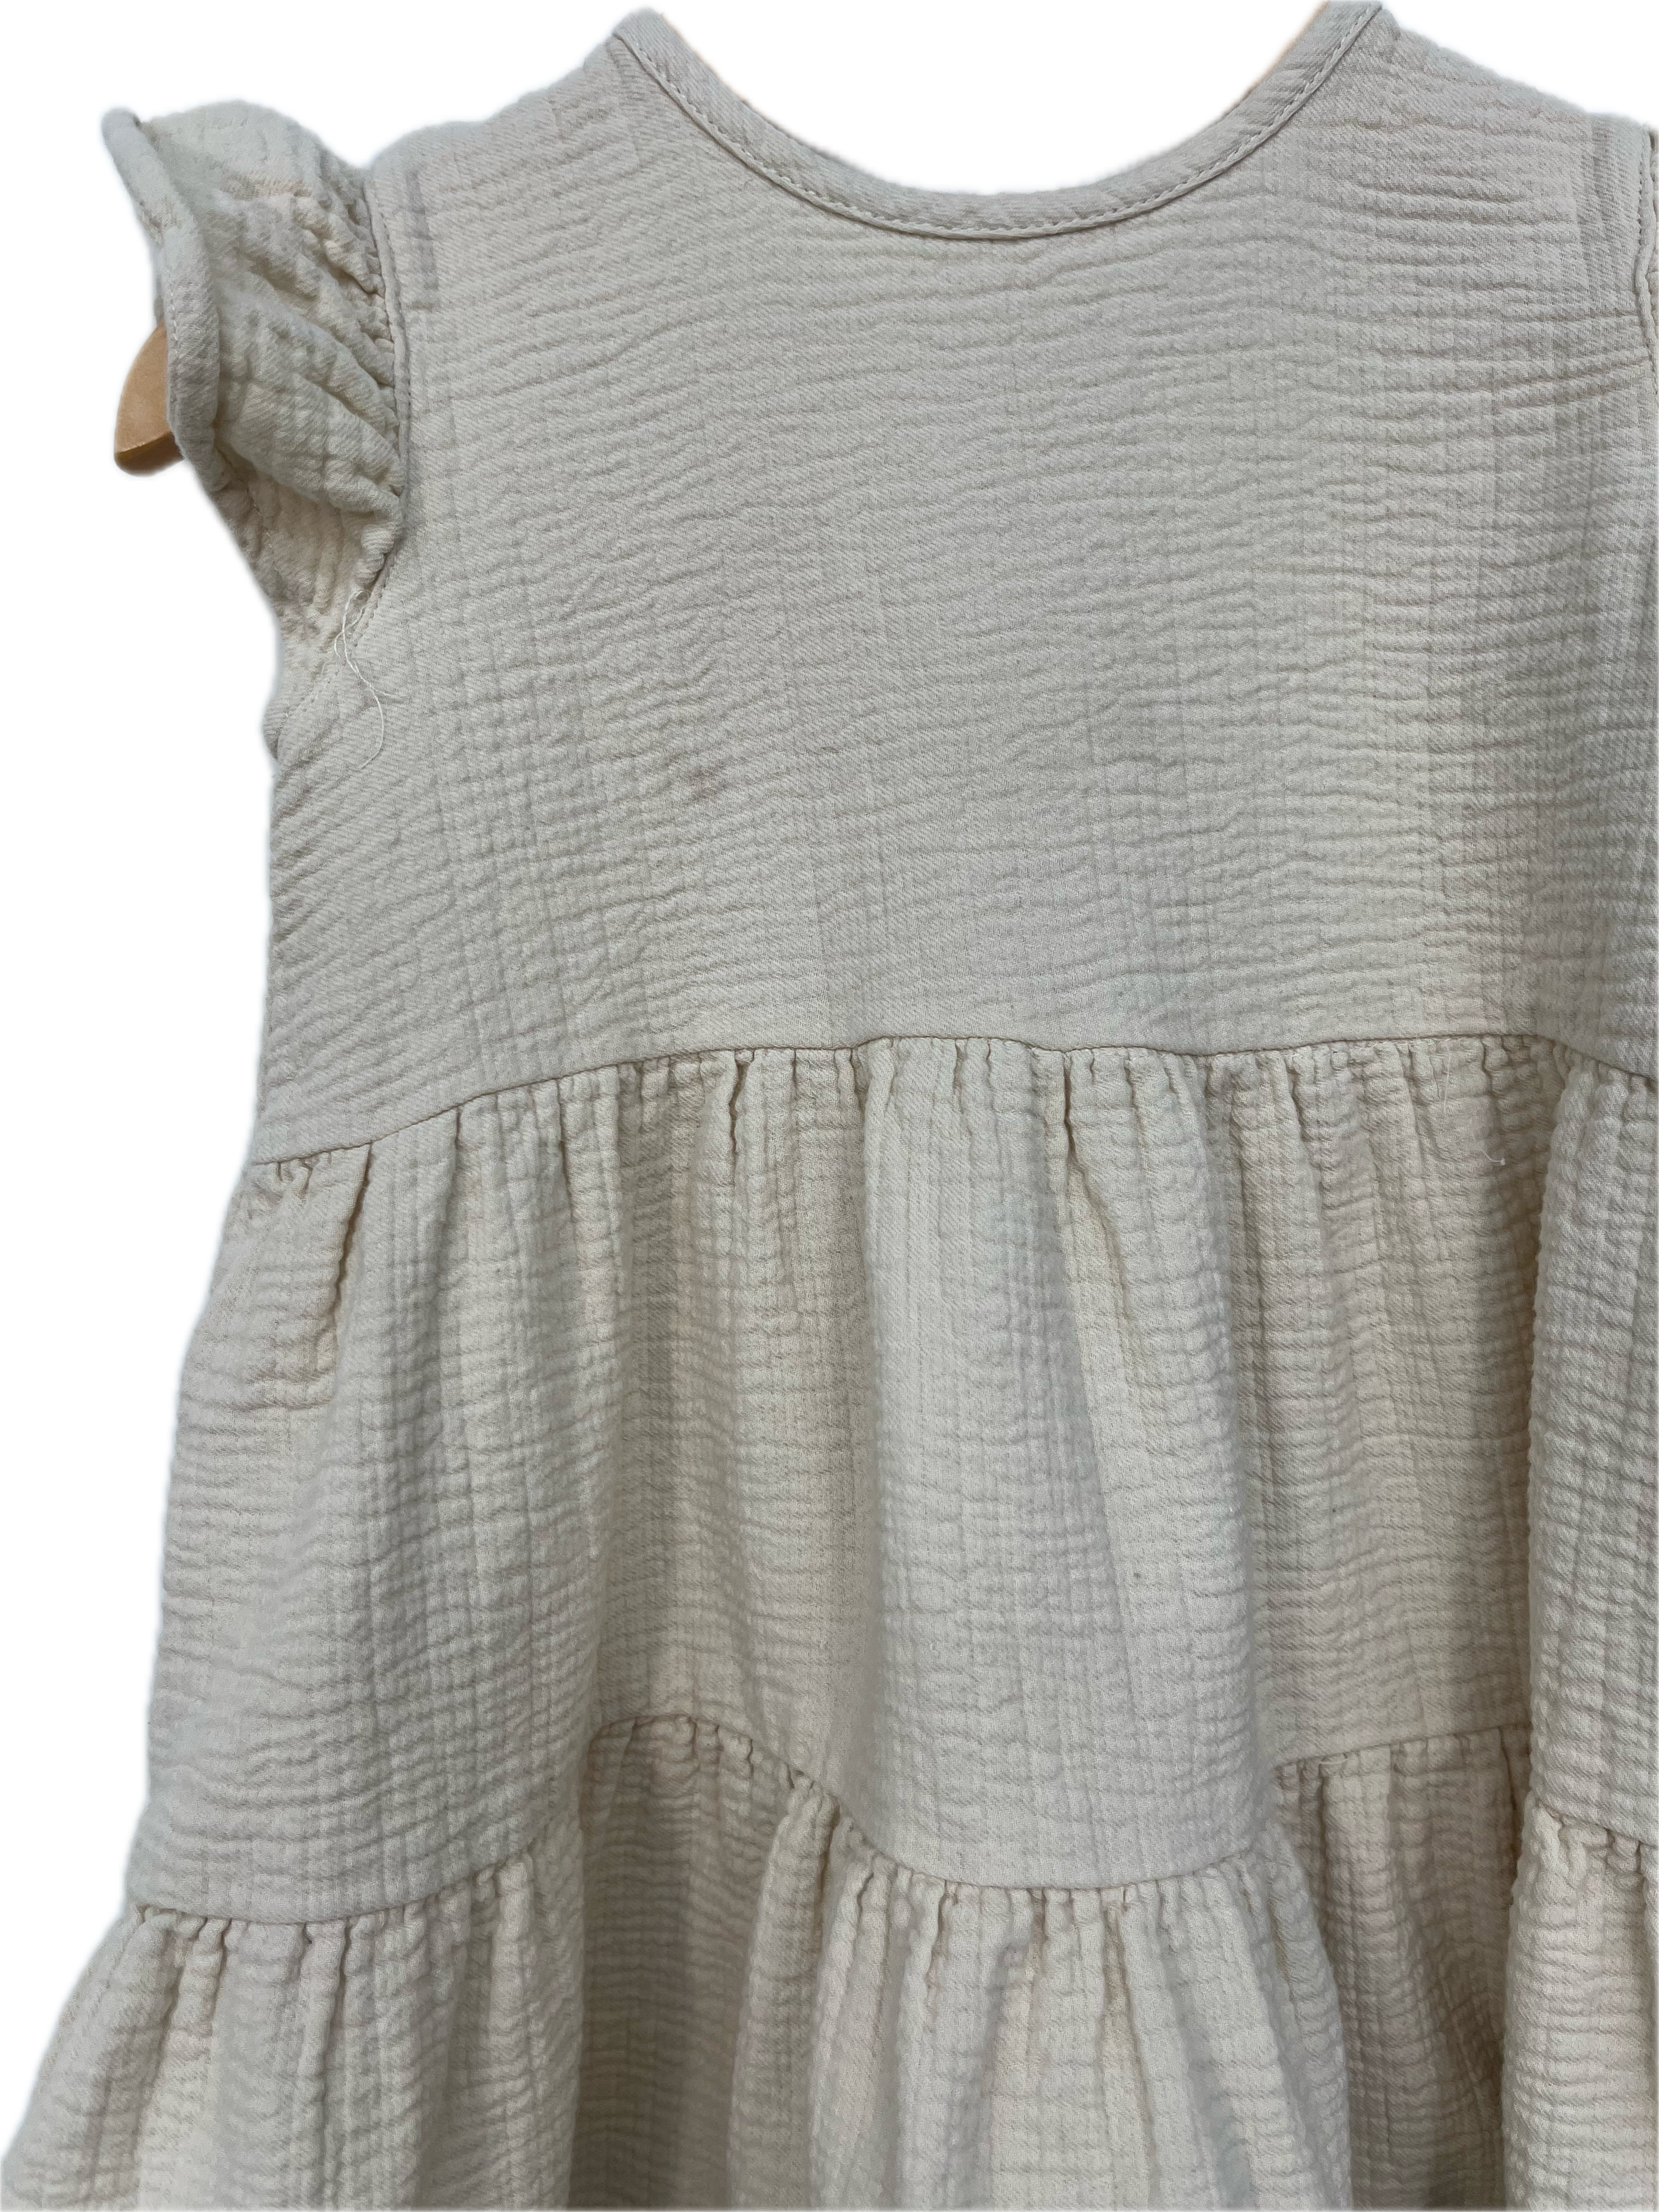 quincy mae crinkled cotton tiered dress 2T